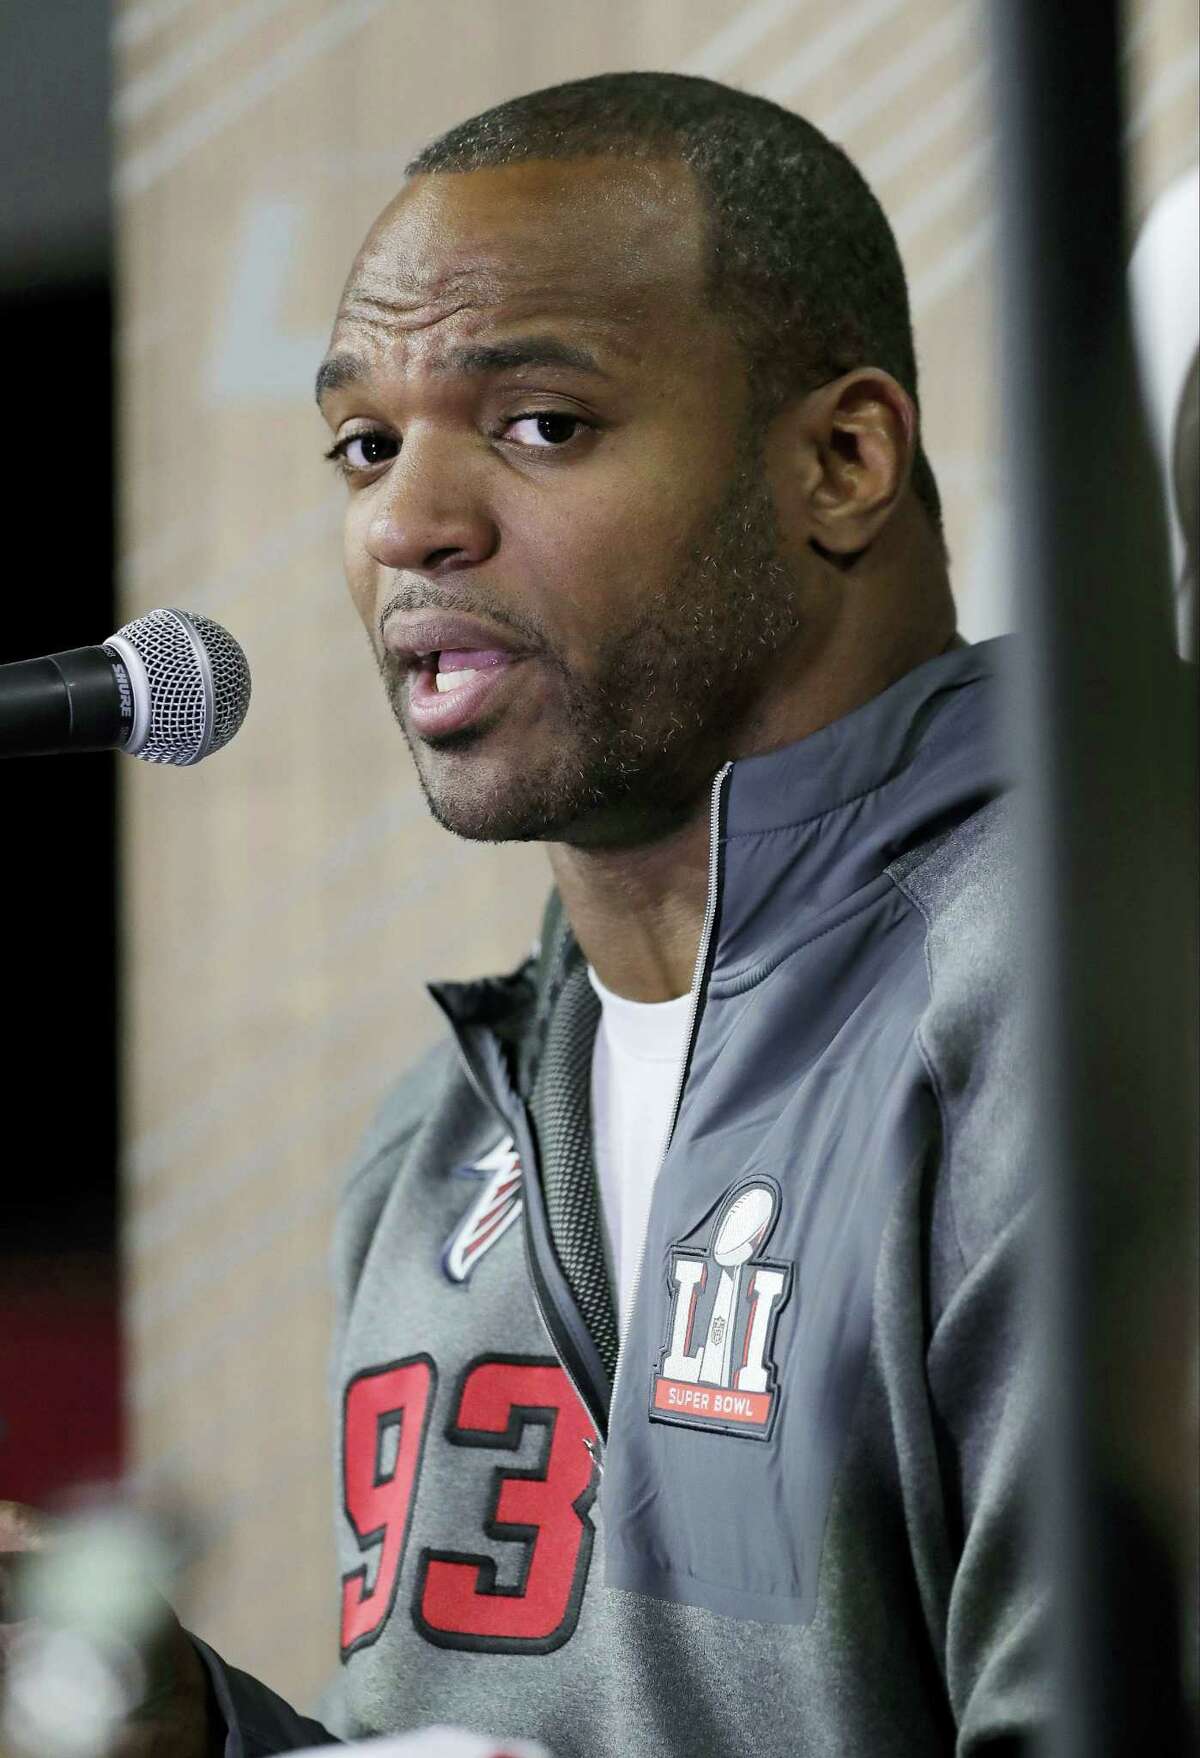 Atlanta Falcons’ Dwight Freeney answers questions during opening night for the NFL Super Bowl 51 at Minute Maid Park Monday.